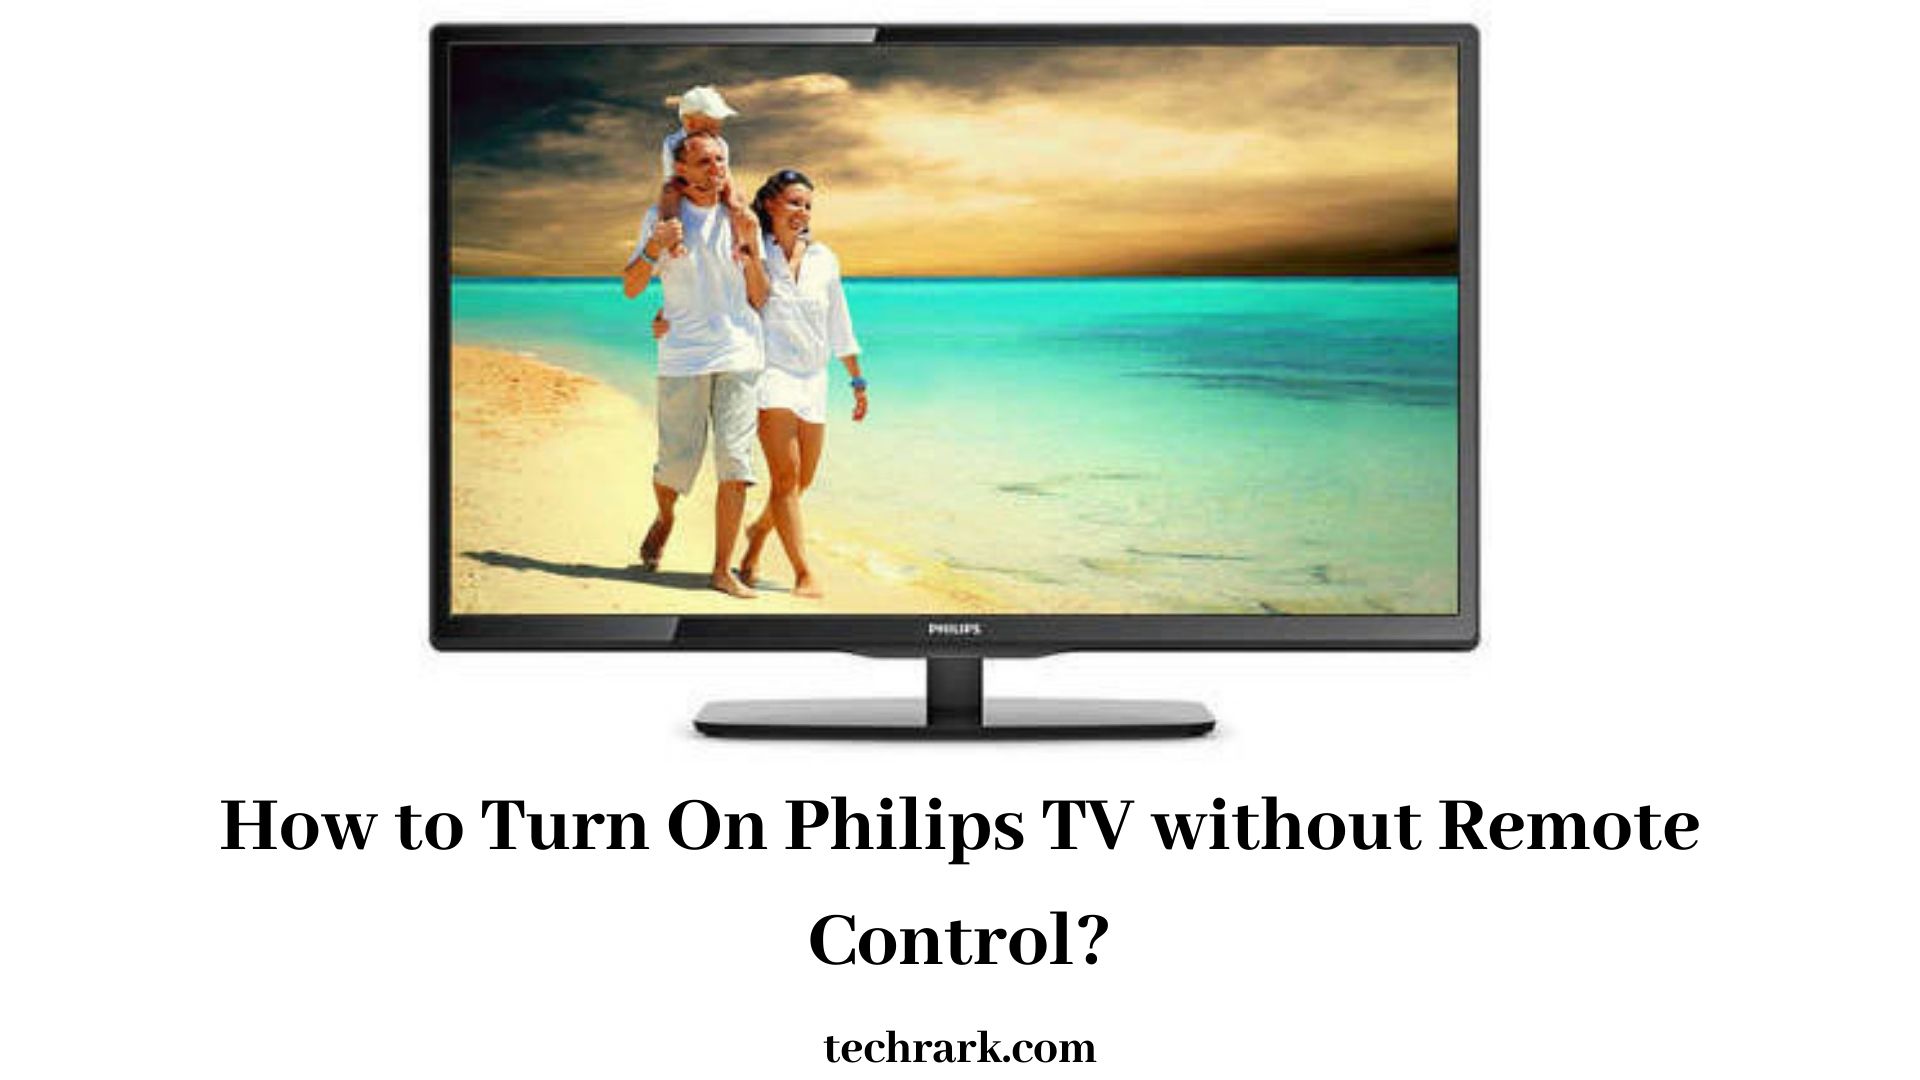 How to Turn On Philips TV without Remote